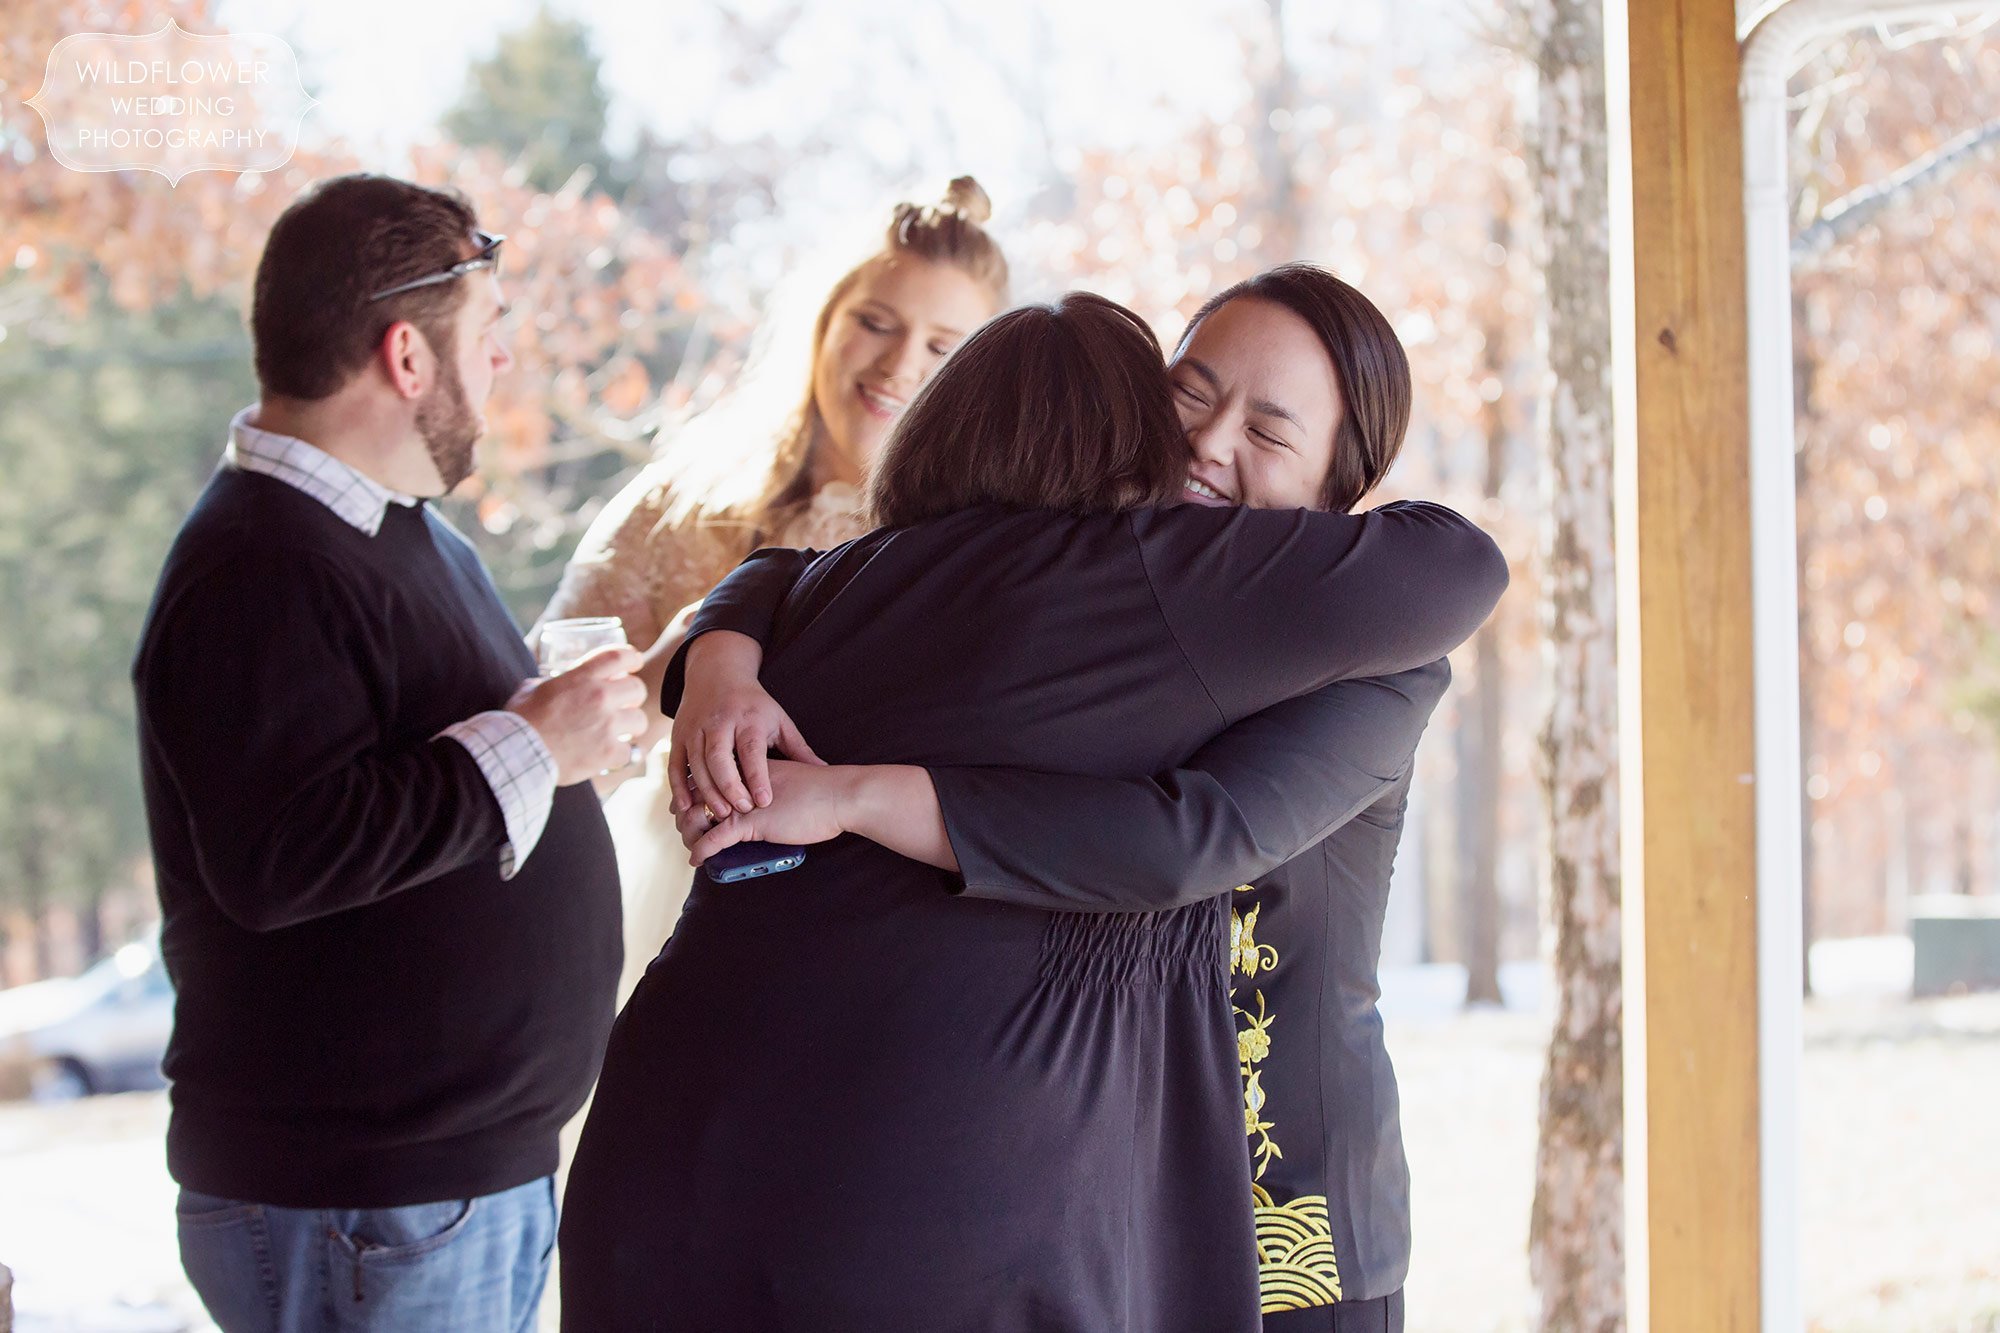 This couple hugs supportive friends after their gay wedding ceremony in mid-MO.